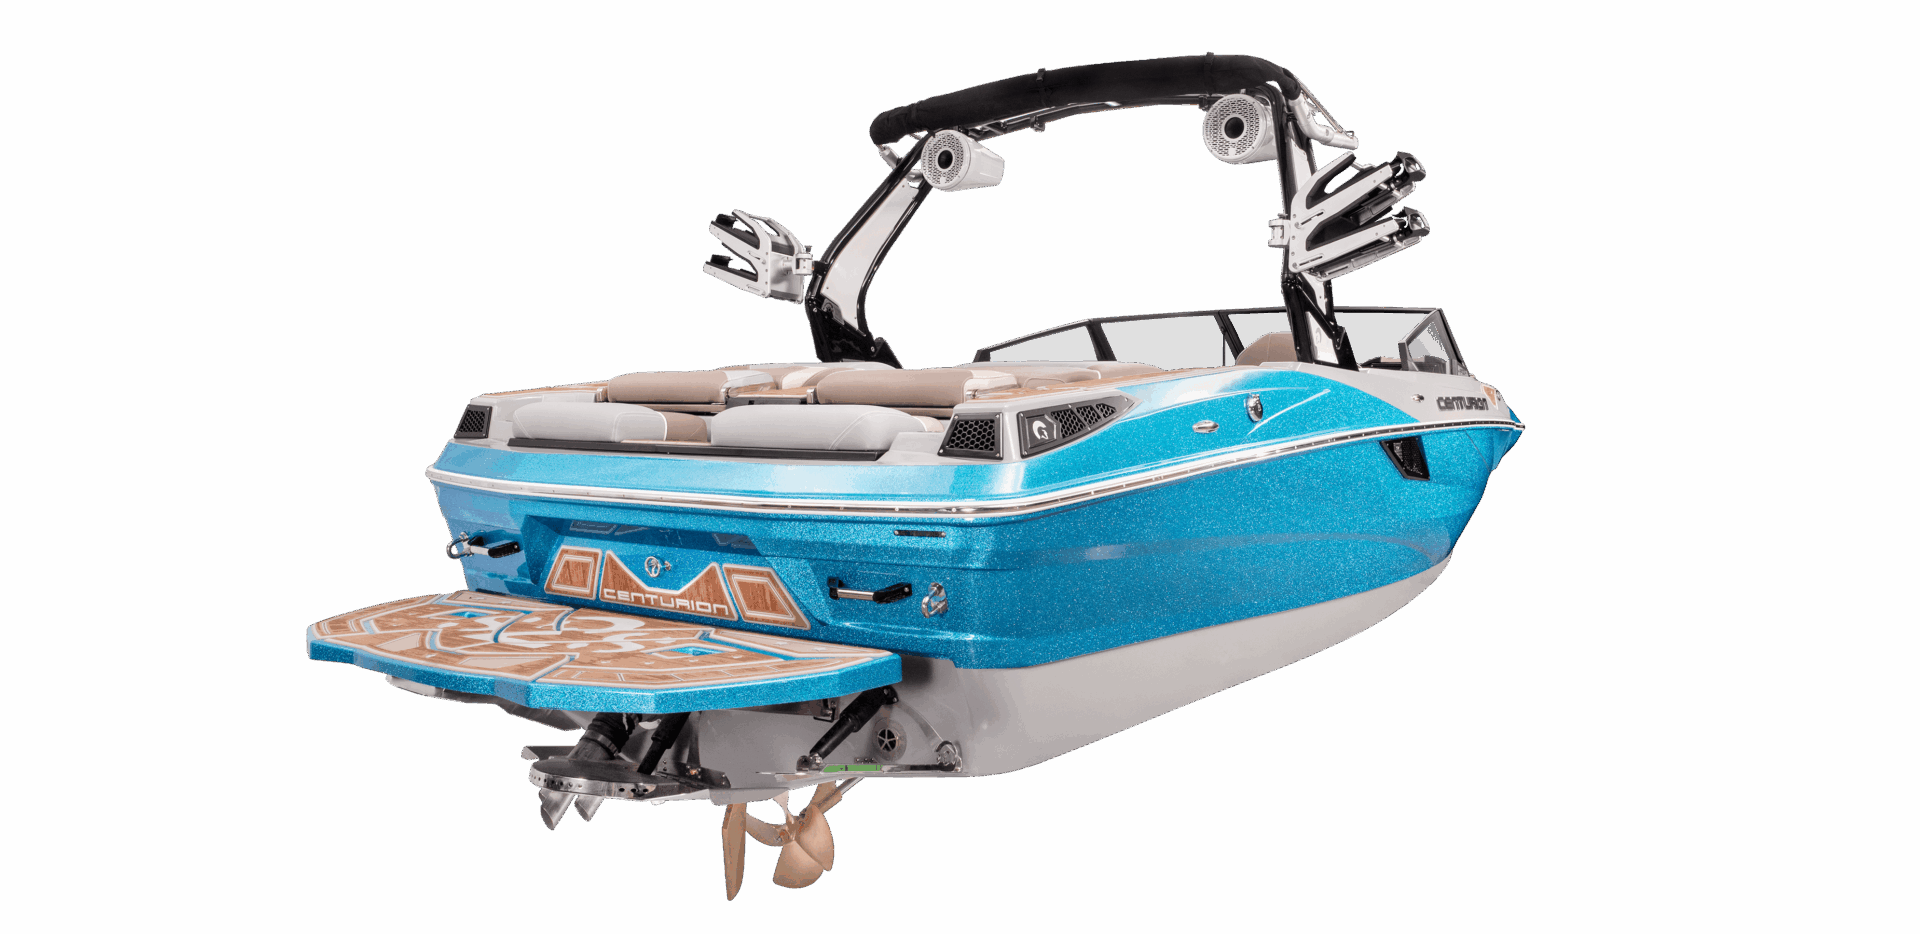 A blue and white Centurion Fe22 wakeboard boat with beige seating and a wooden swim platform is shown against a plain background.